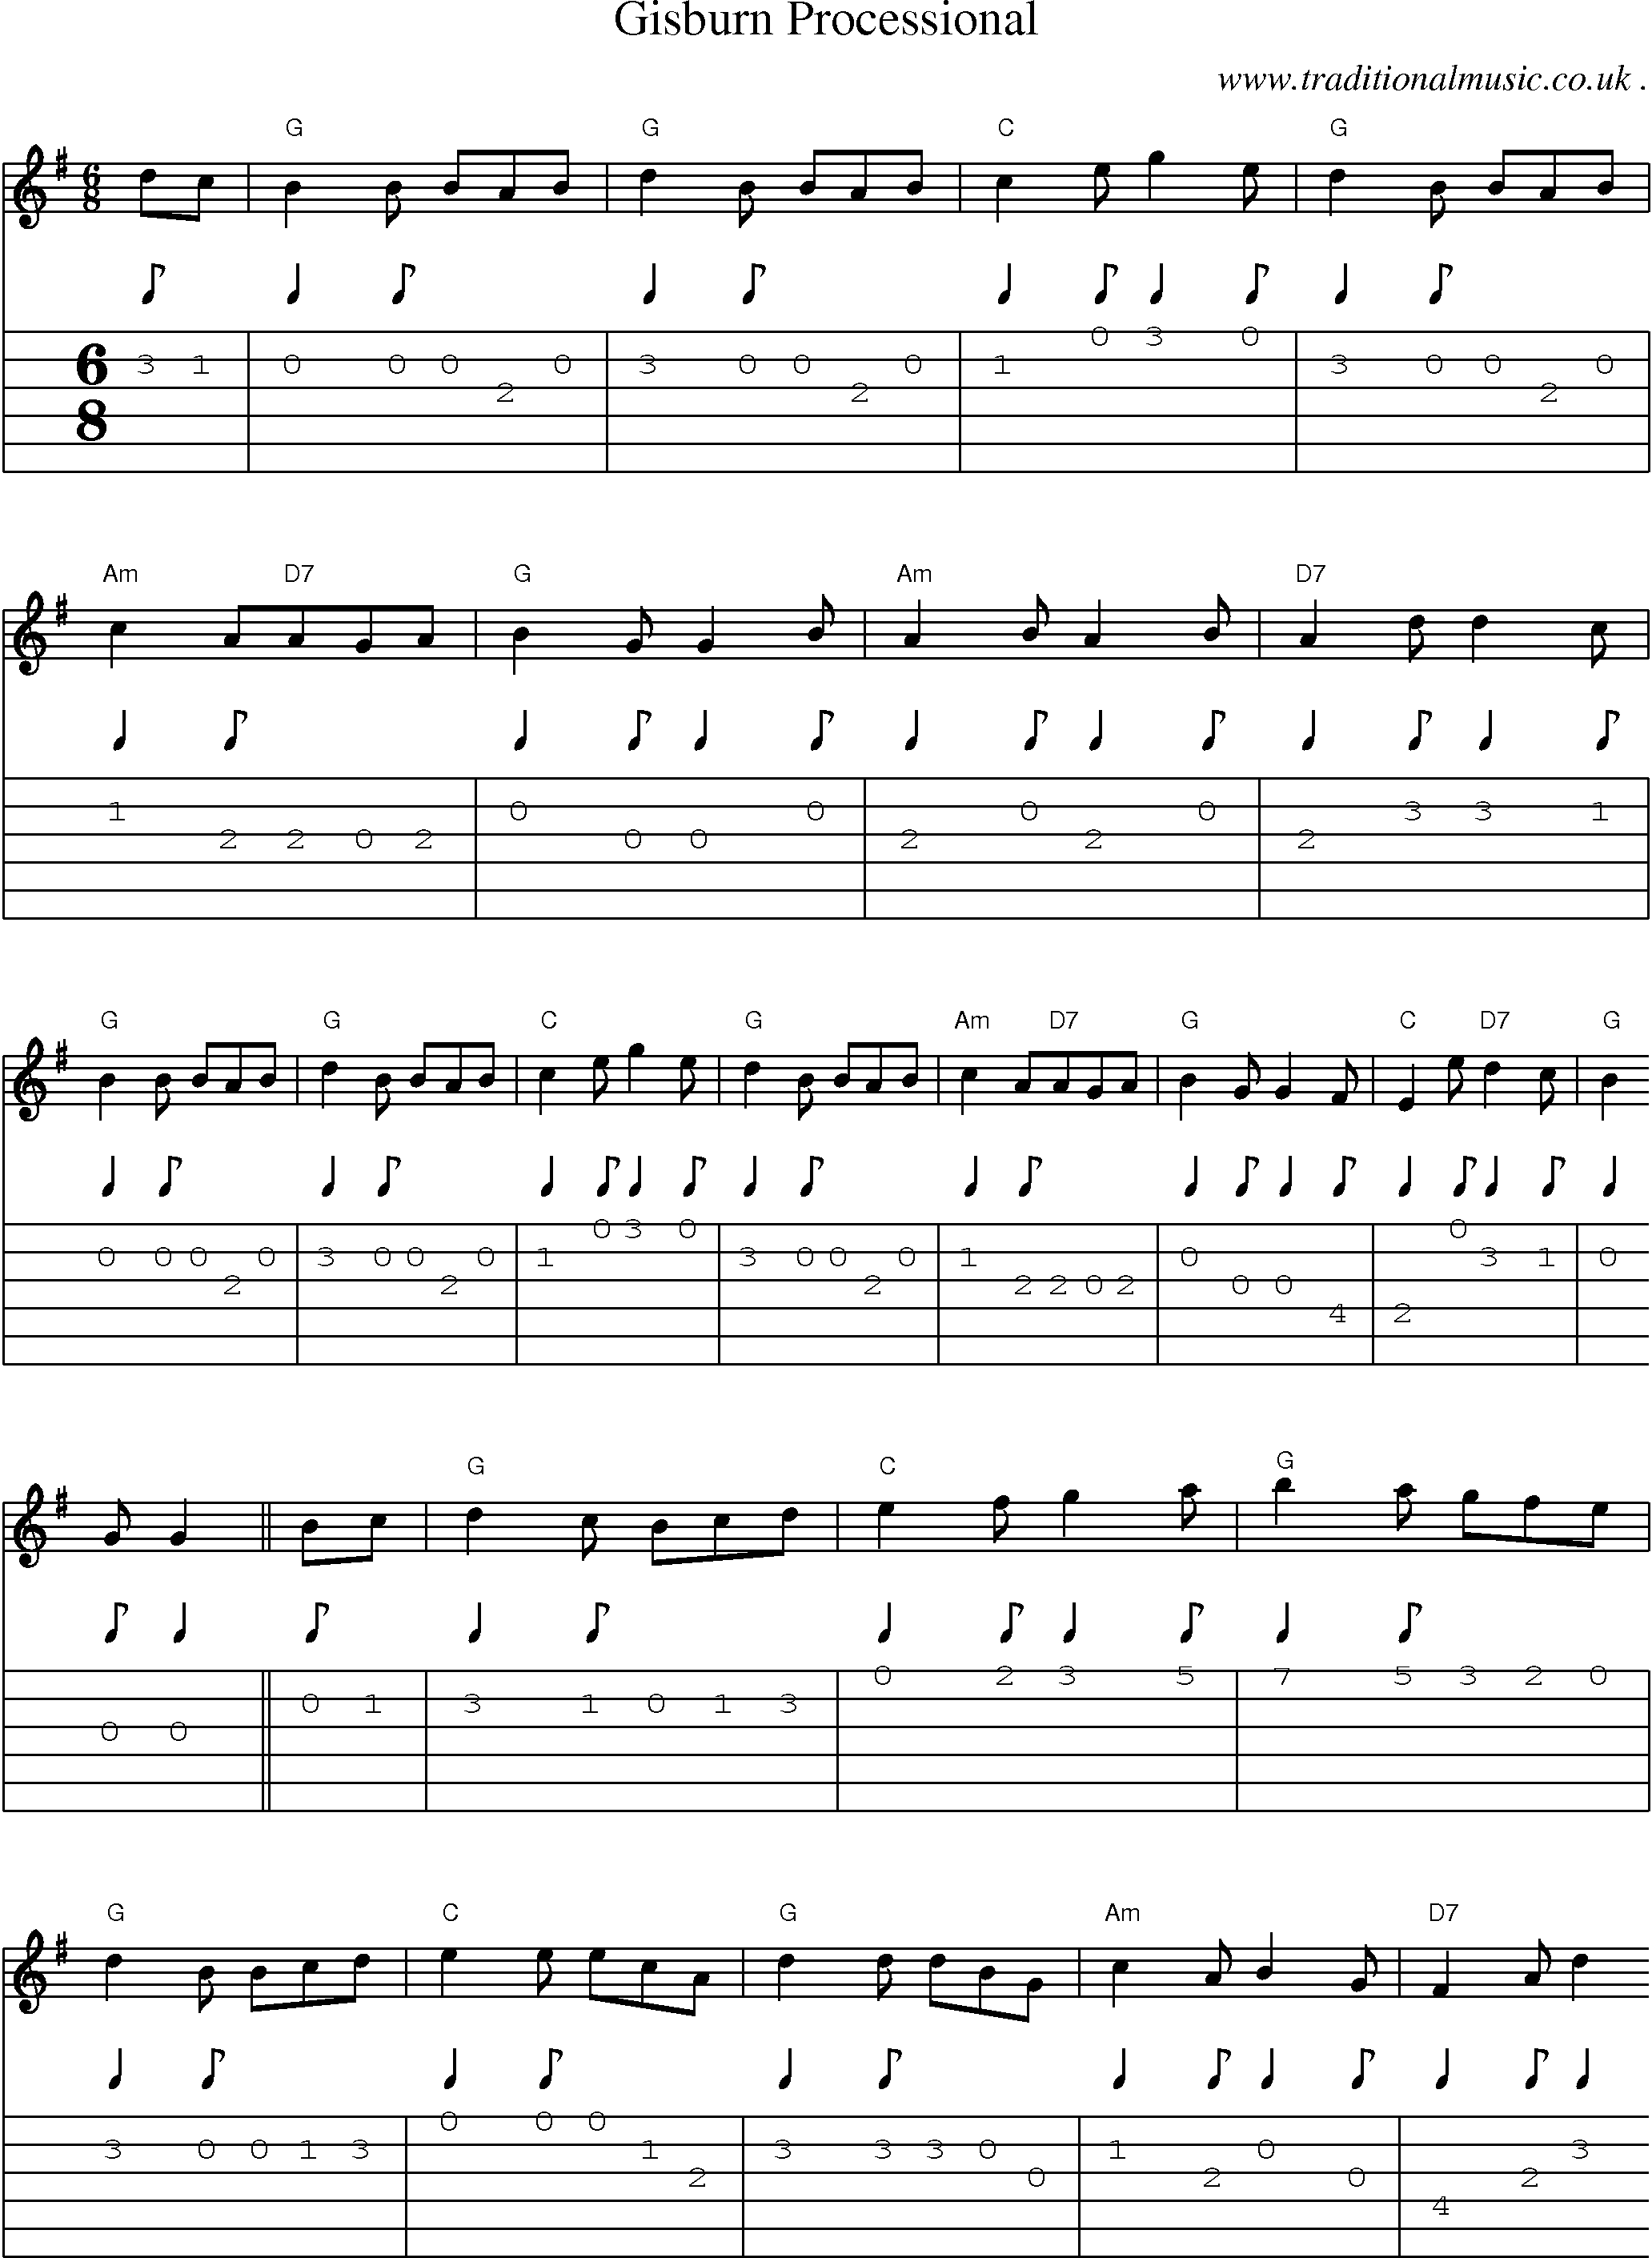 Sheet-Music and Guitar Tabs for Gisburn Processional